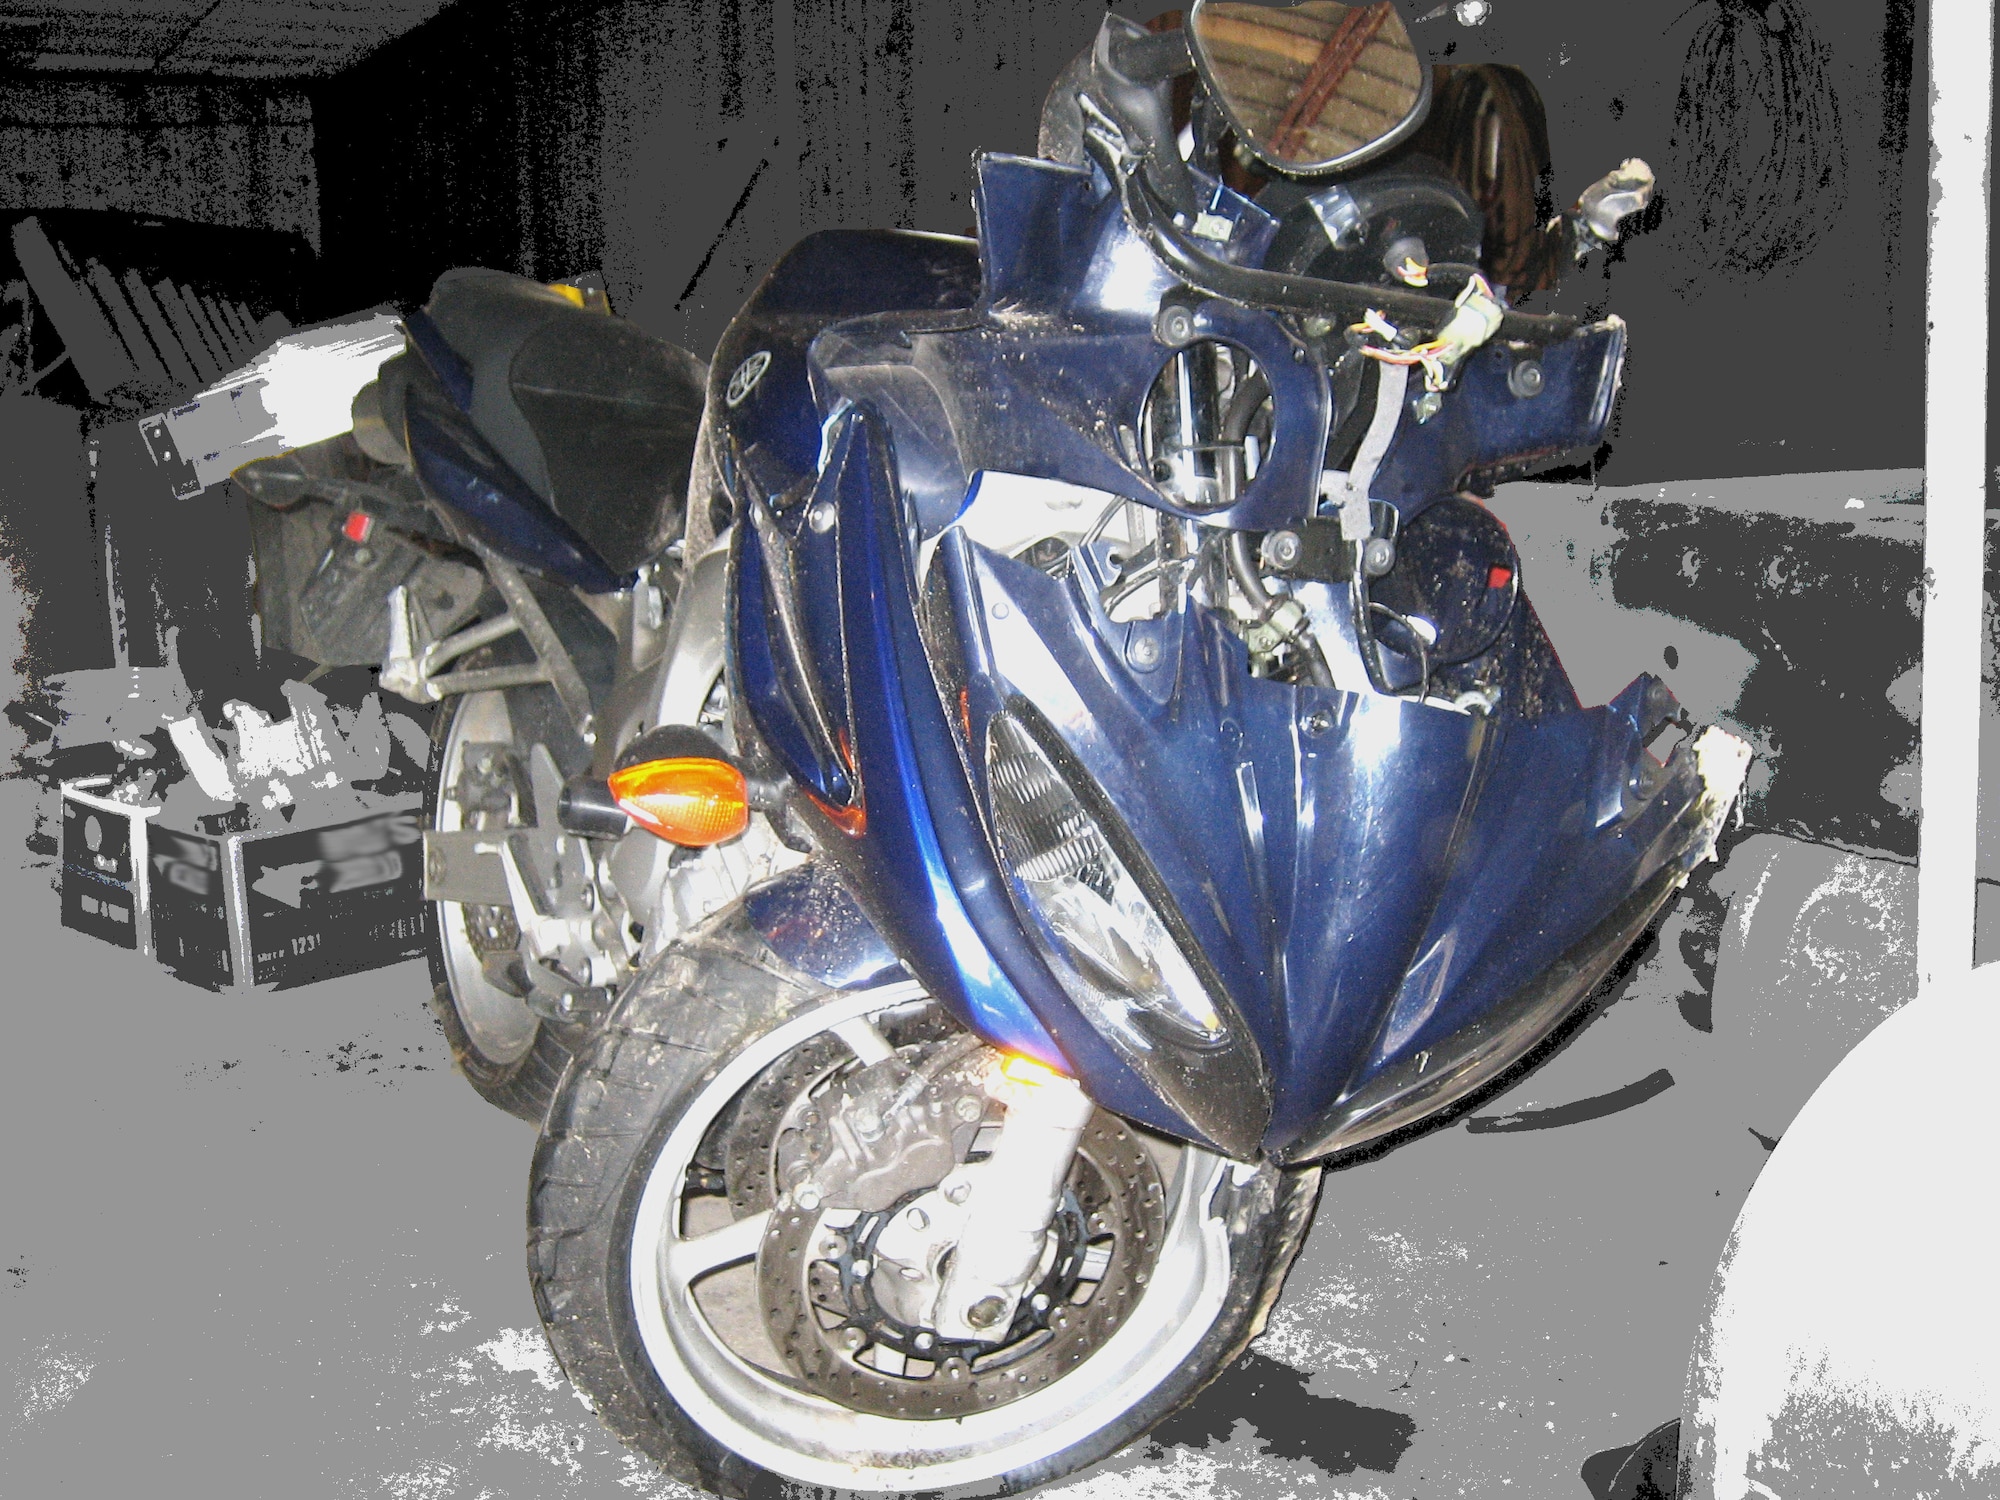 YOUNGSTOWN AIR RESERVE STATION, Ohio - Shown in a photo taken by Master Sgt. Alan Navecky, Jr., a ground safety manager here, the damaged motorcycle ridden by his son Alan Navecky, III suggests how devastating the younger Mr. Navecky's injuries might have been if he had not been wearing the proper personal protection equipment.